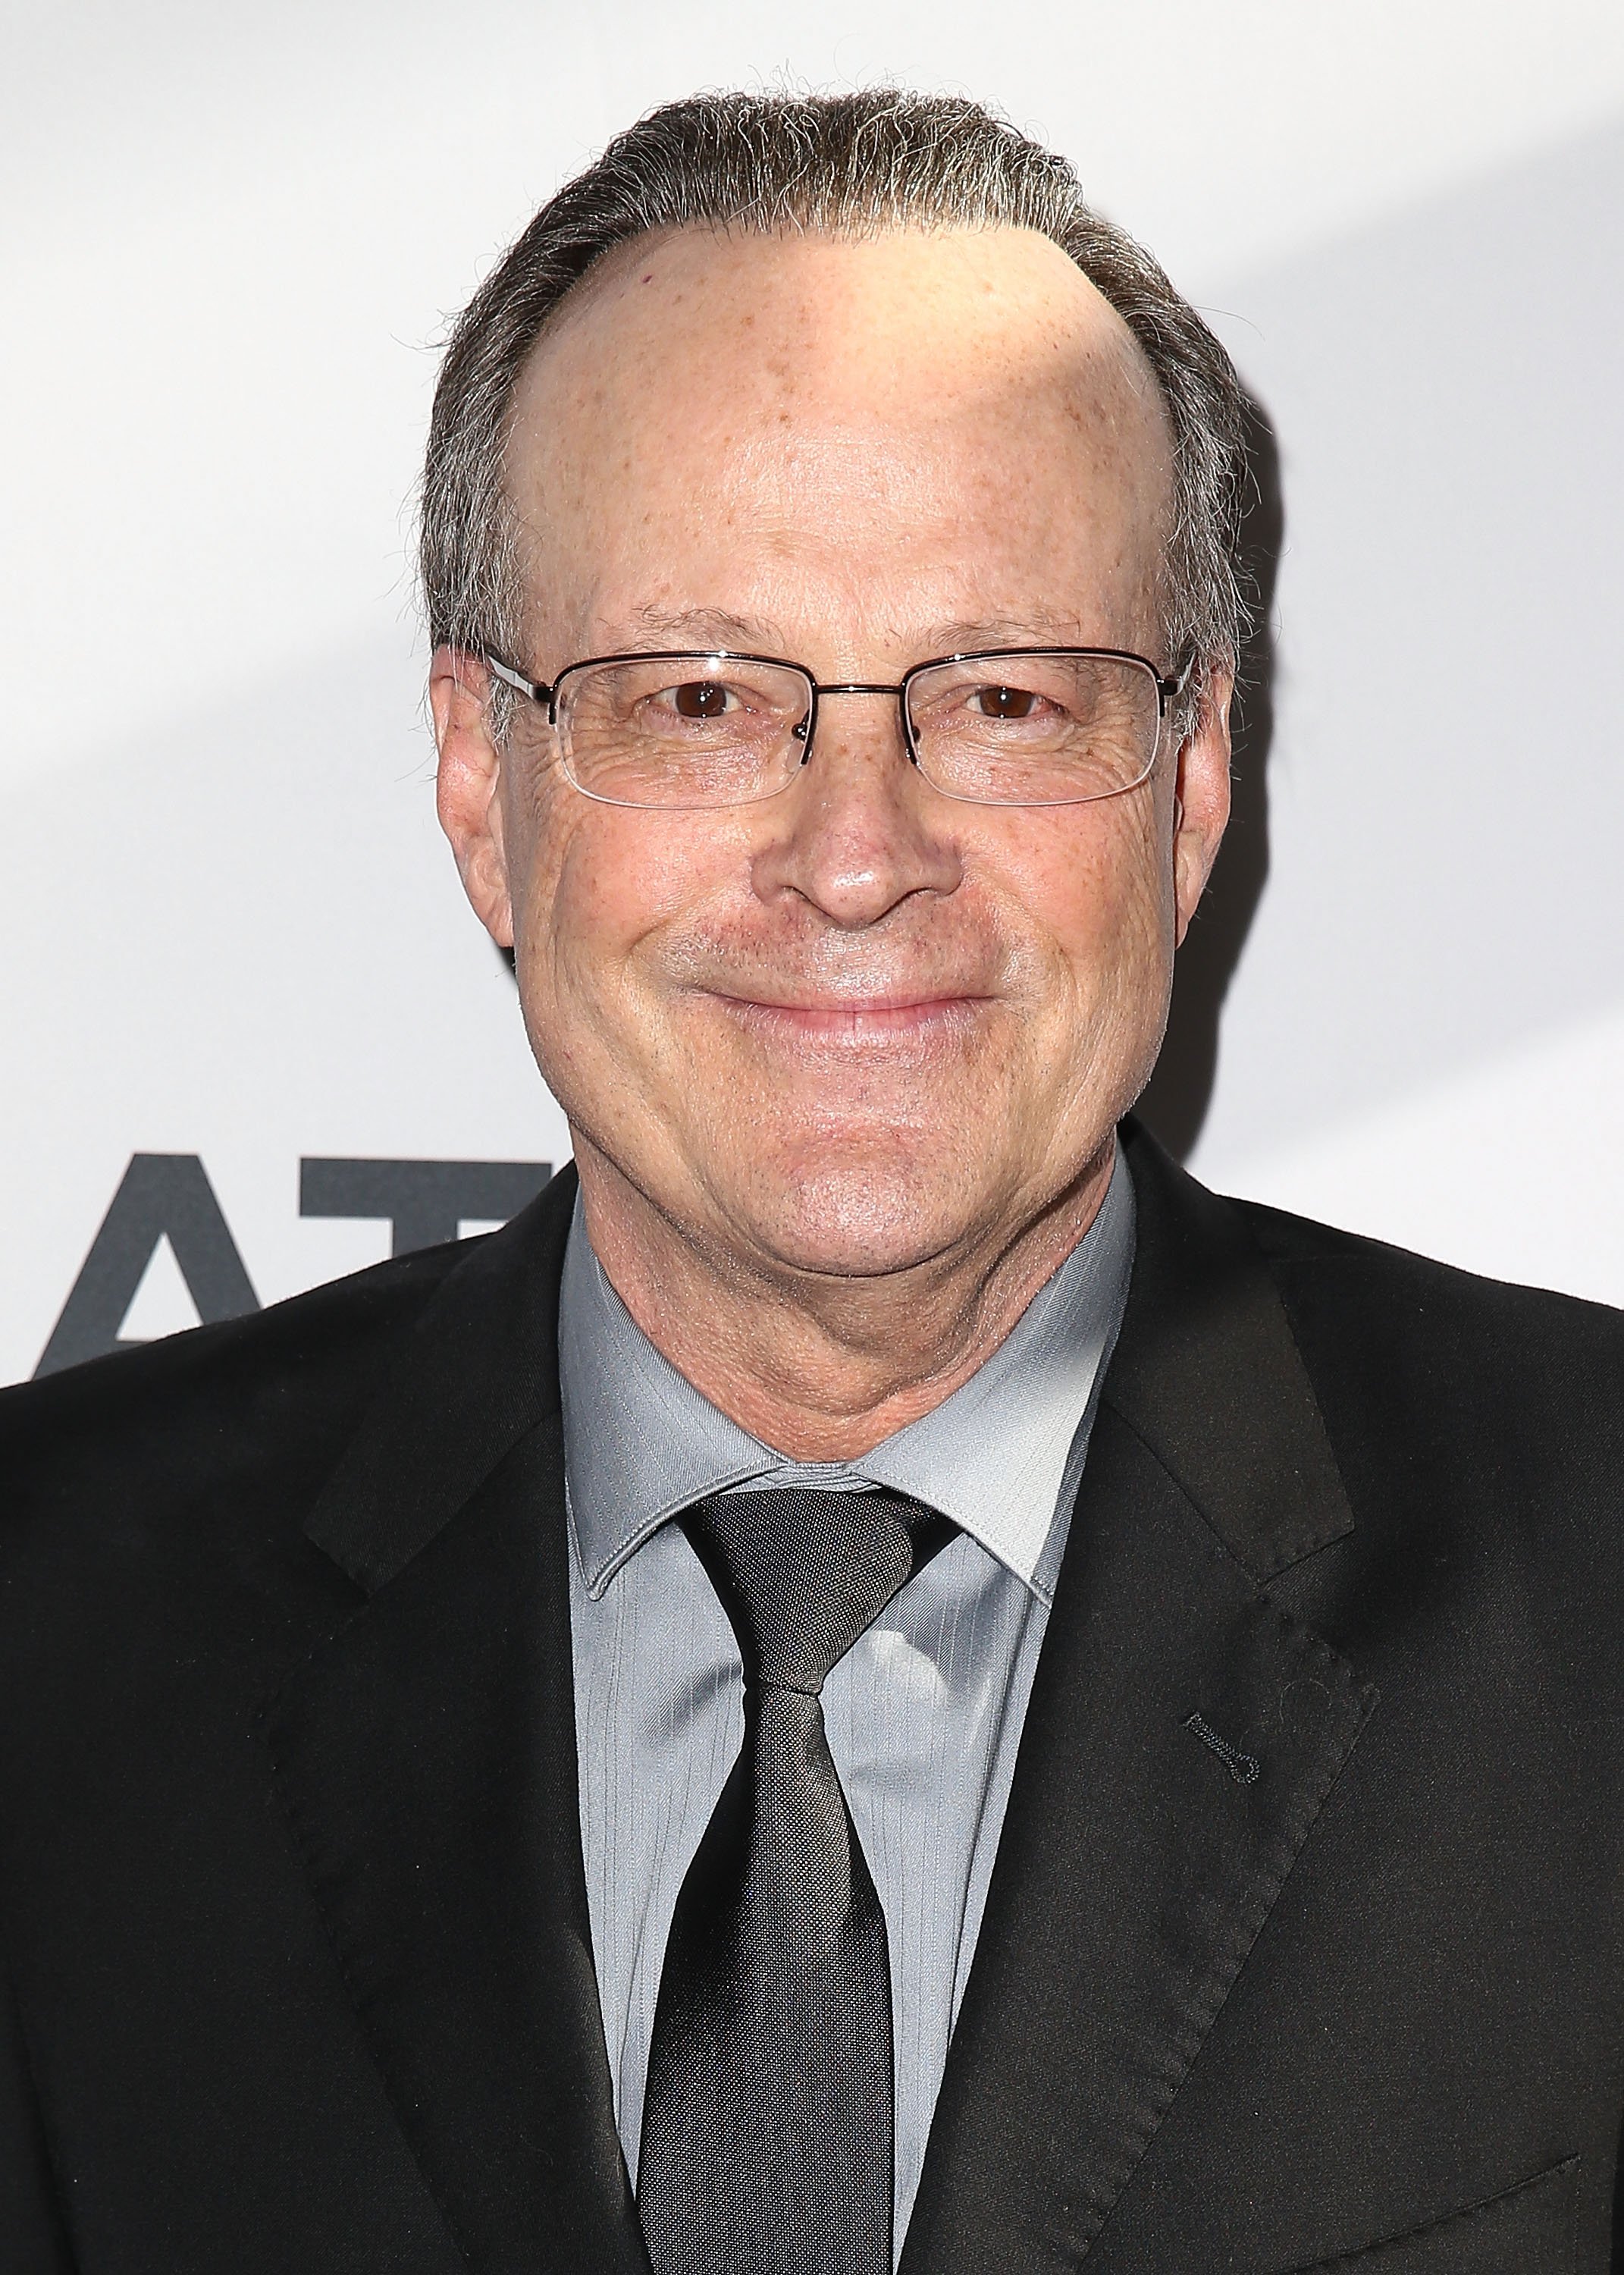 Dwight Schultz at the premiere of Lionsgate Films' "America" on June 30, 2014 in Los Angeles, California. | Photo: Getty Images